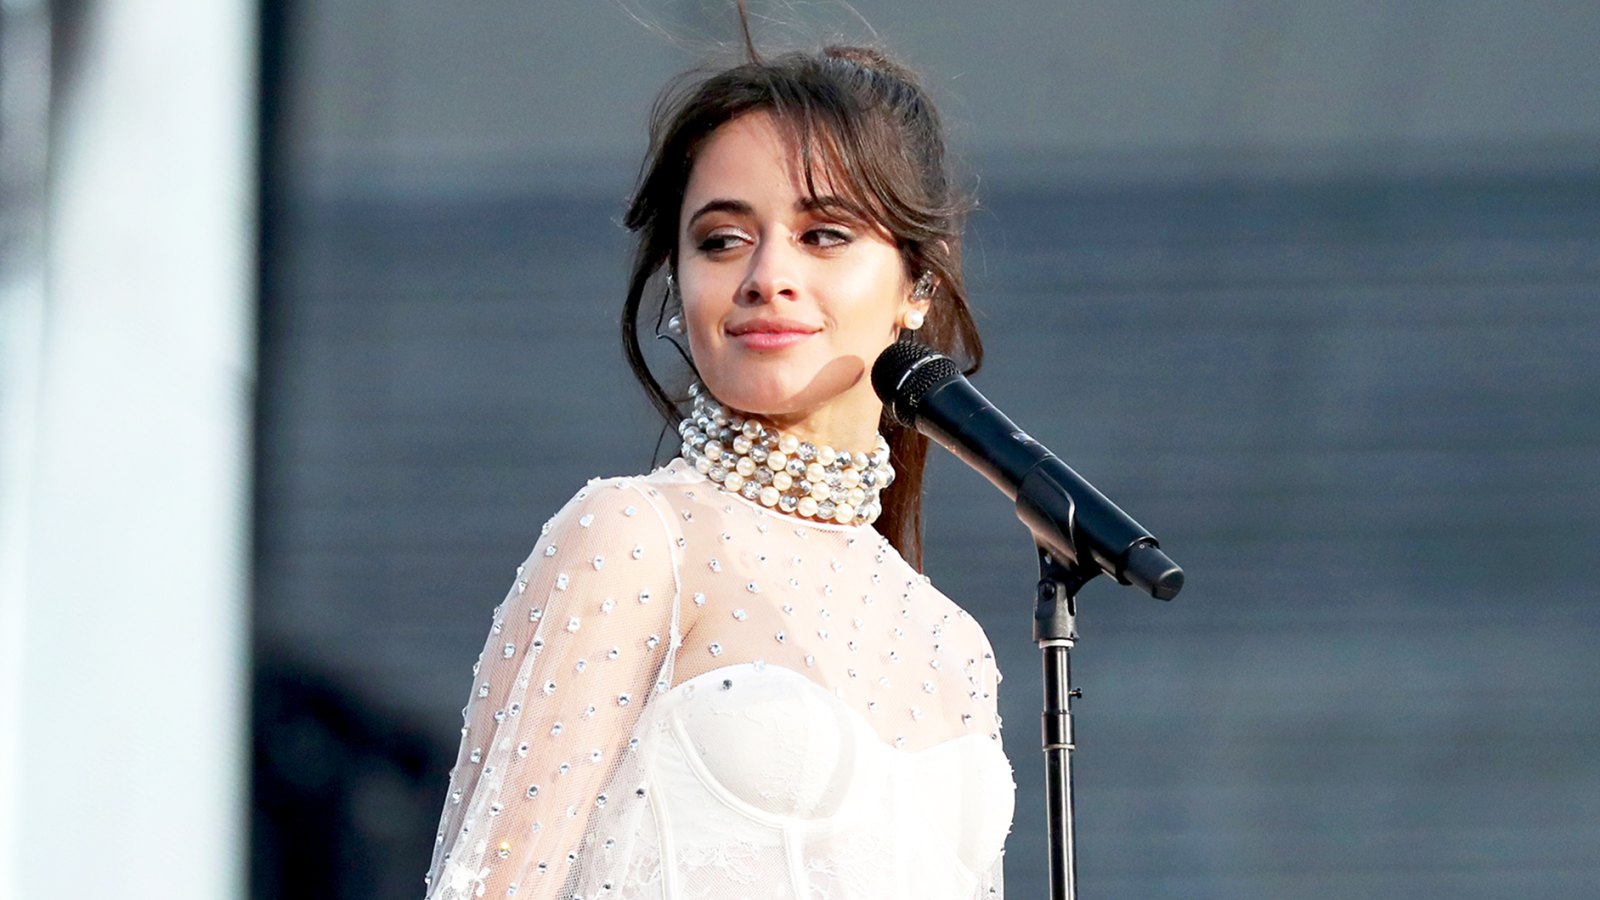 Camila Cabello performs onstage during the Taylor Swift Reputation Stadium Tour at the Rose Bowl on May 18, 2018 in Pasadena, California.